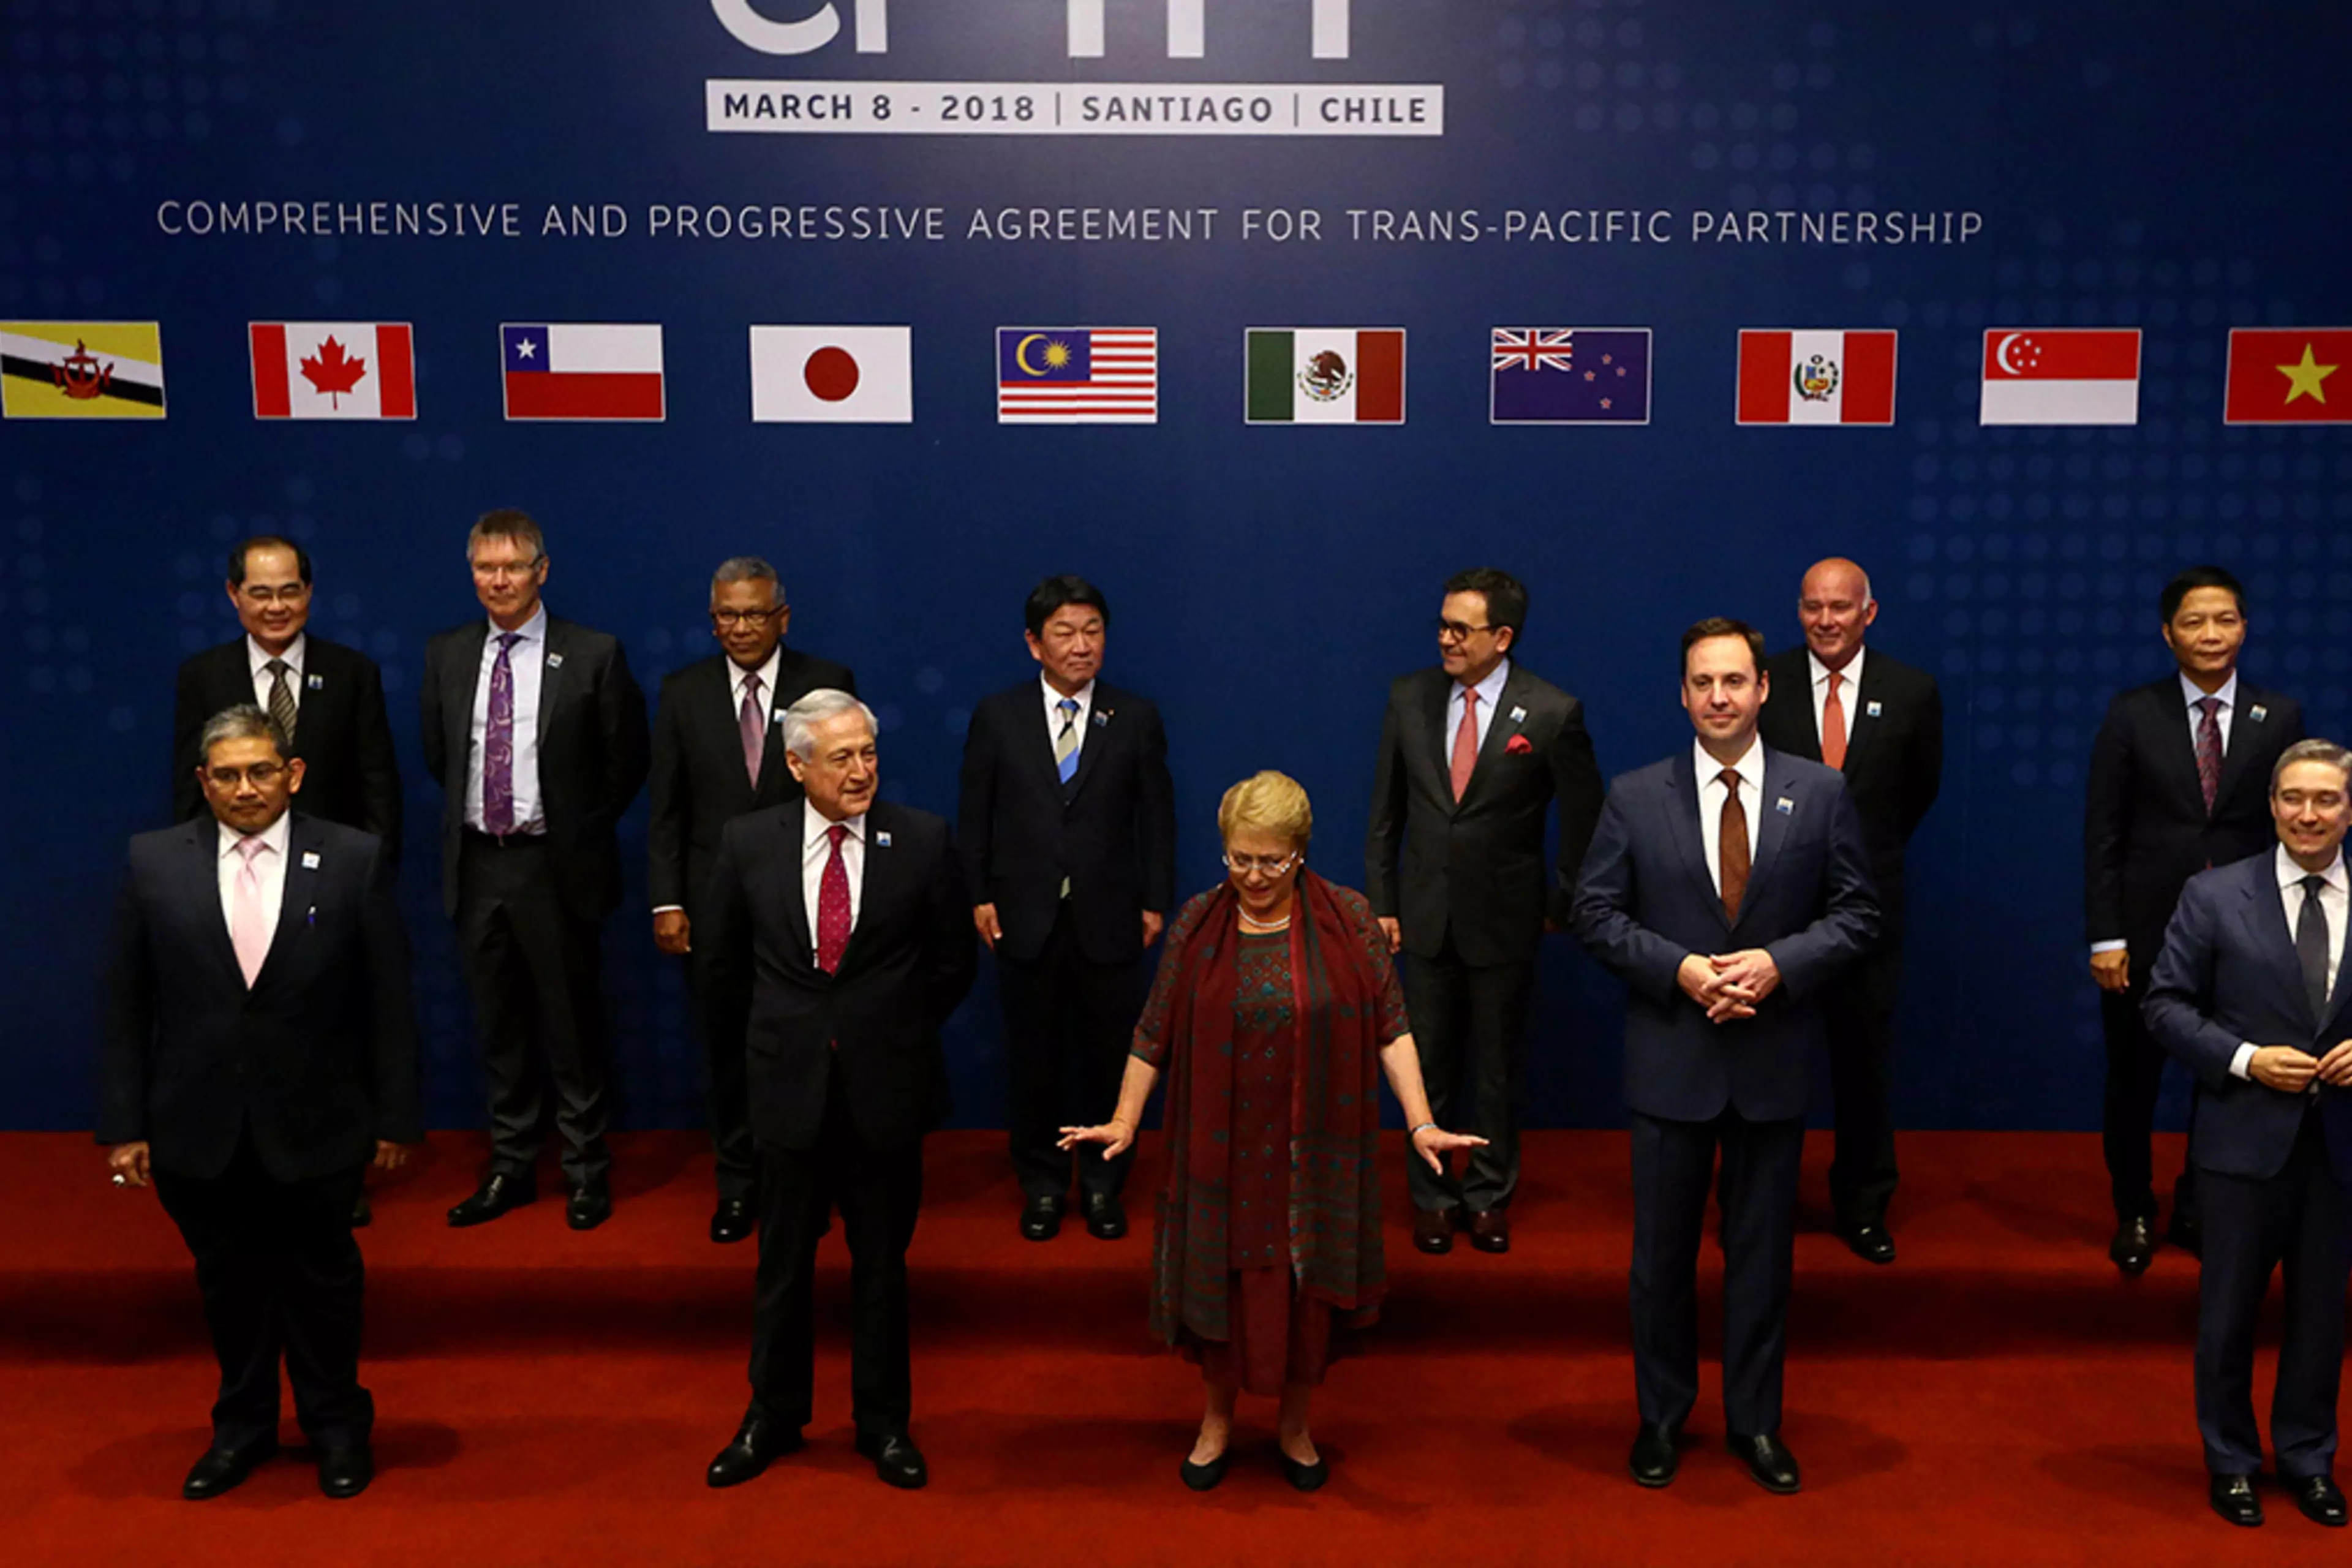 Remaining members of the TPP gather at the signing agreement ceremony in Santiago, Chile, in March 2018.